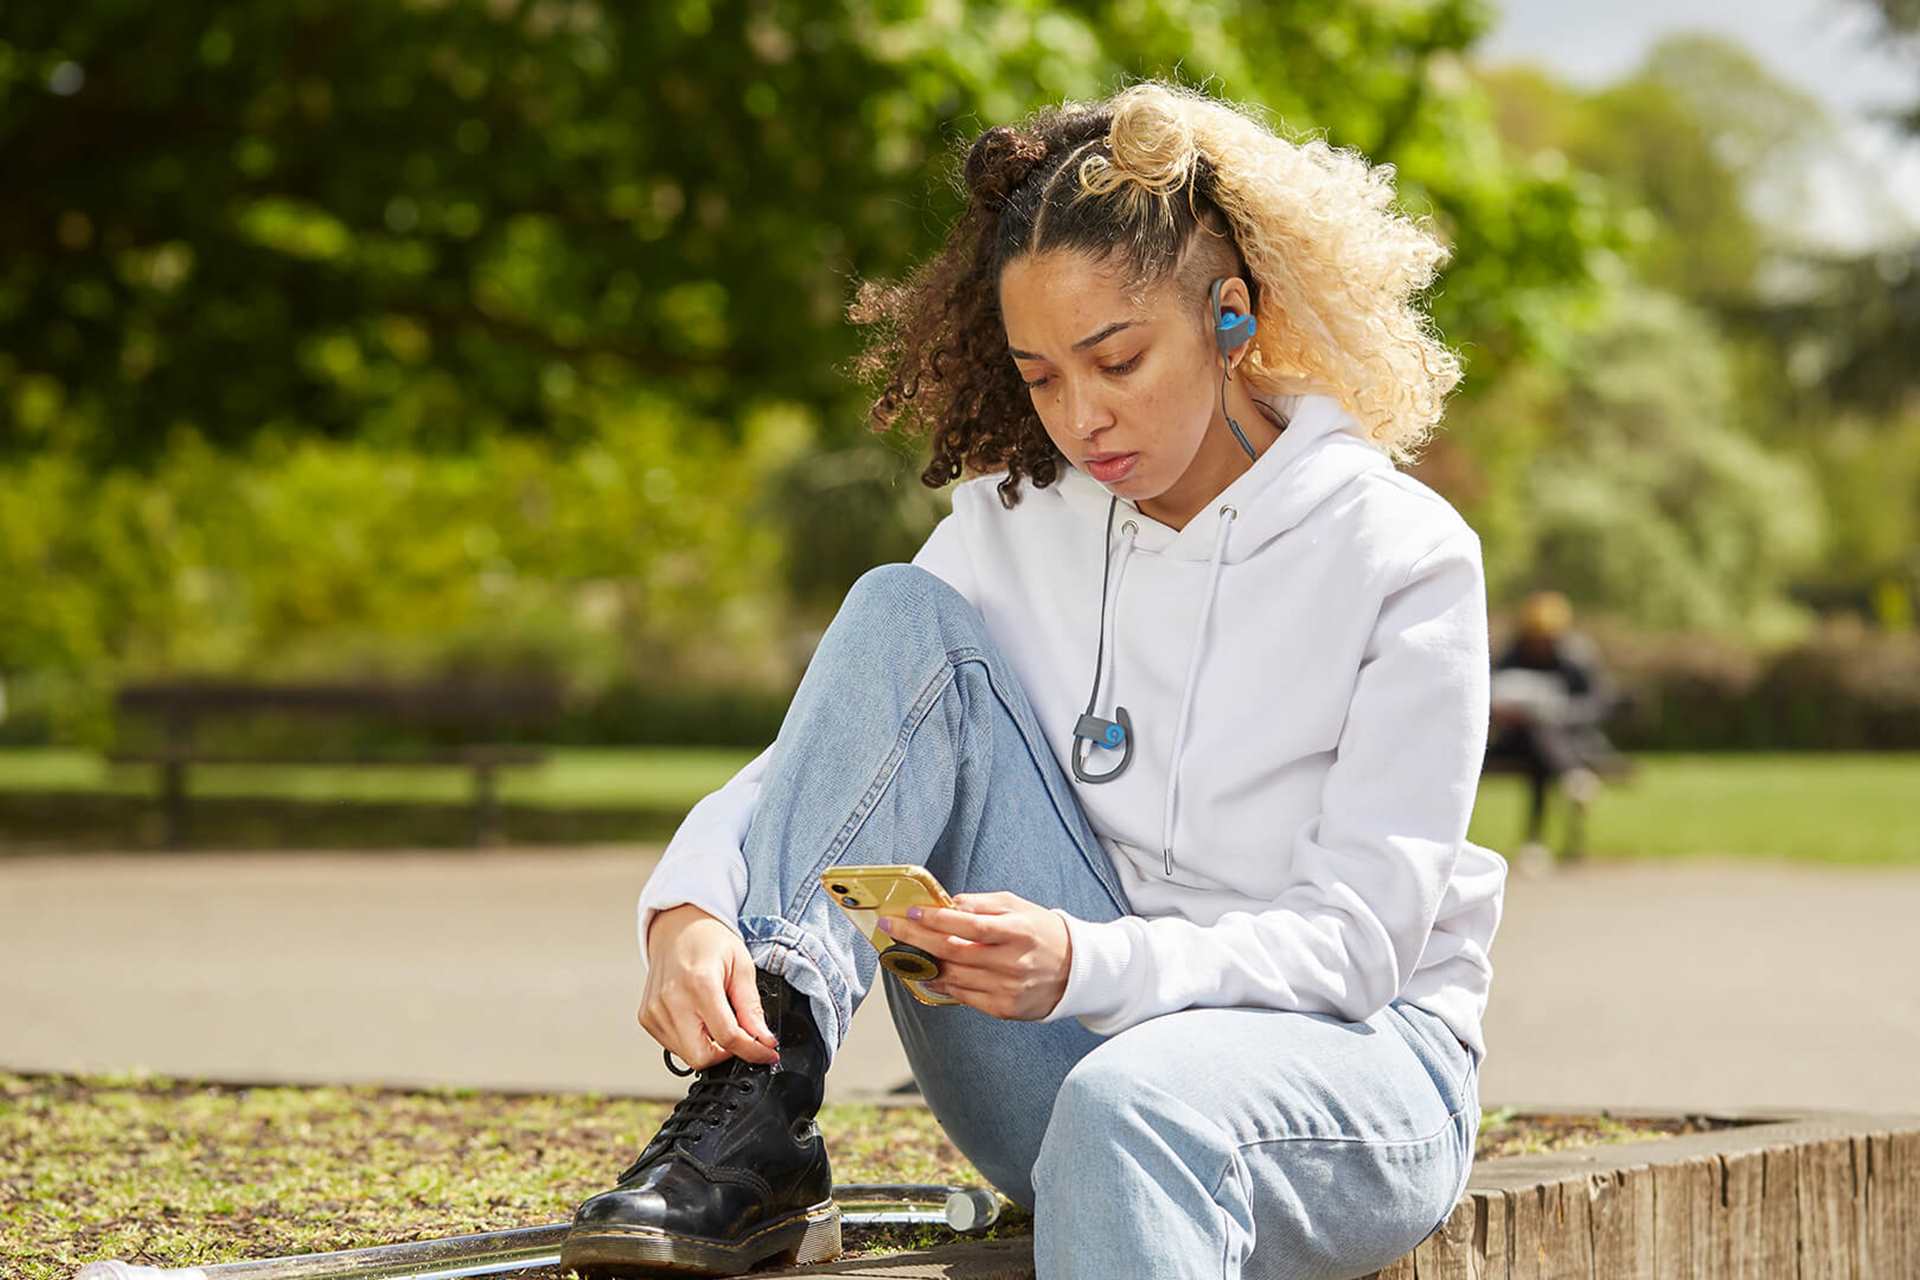 A girl sitting in the park wearing headphones. She is looking down at her phone and listening to music.